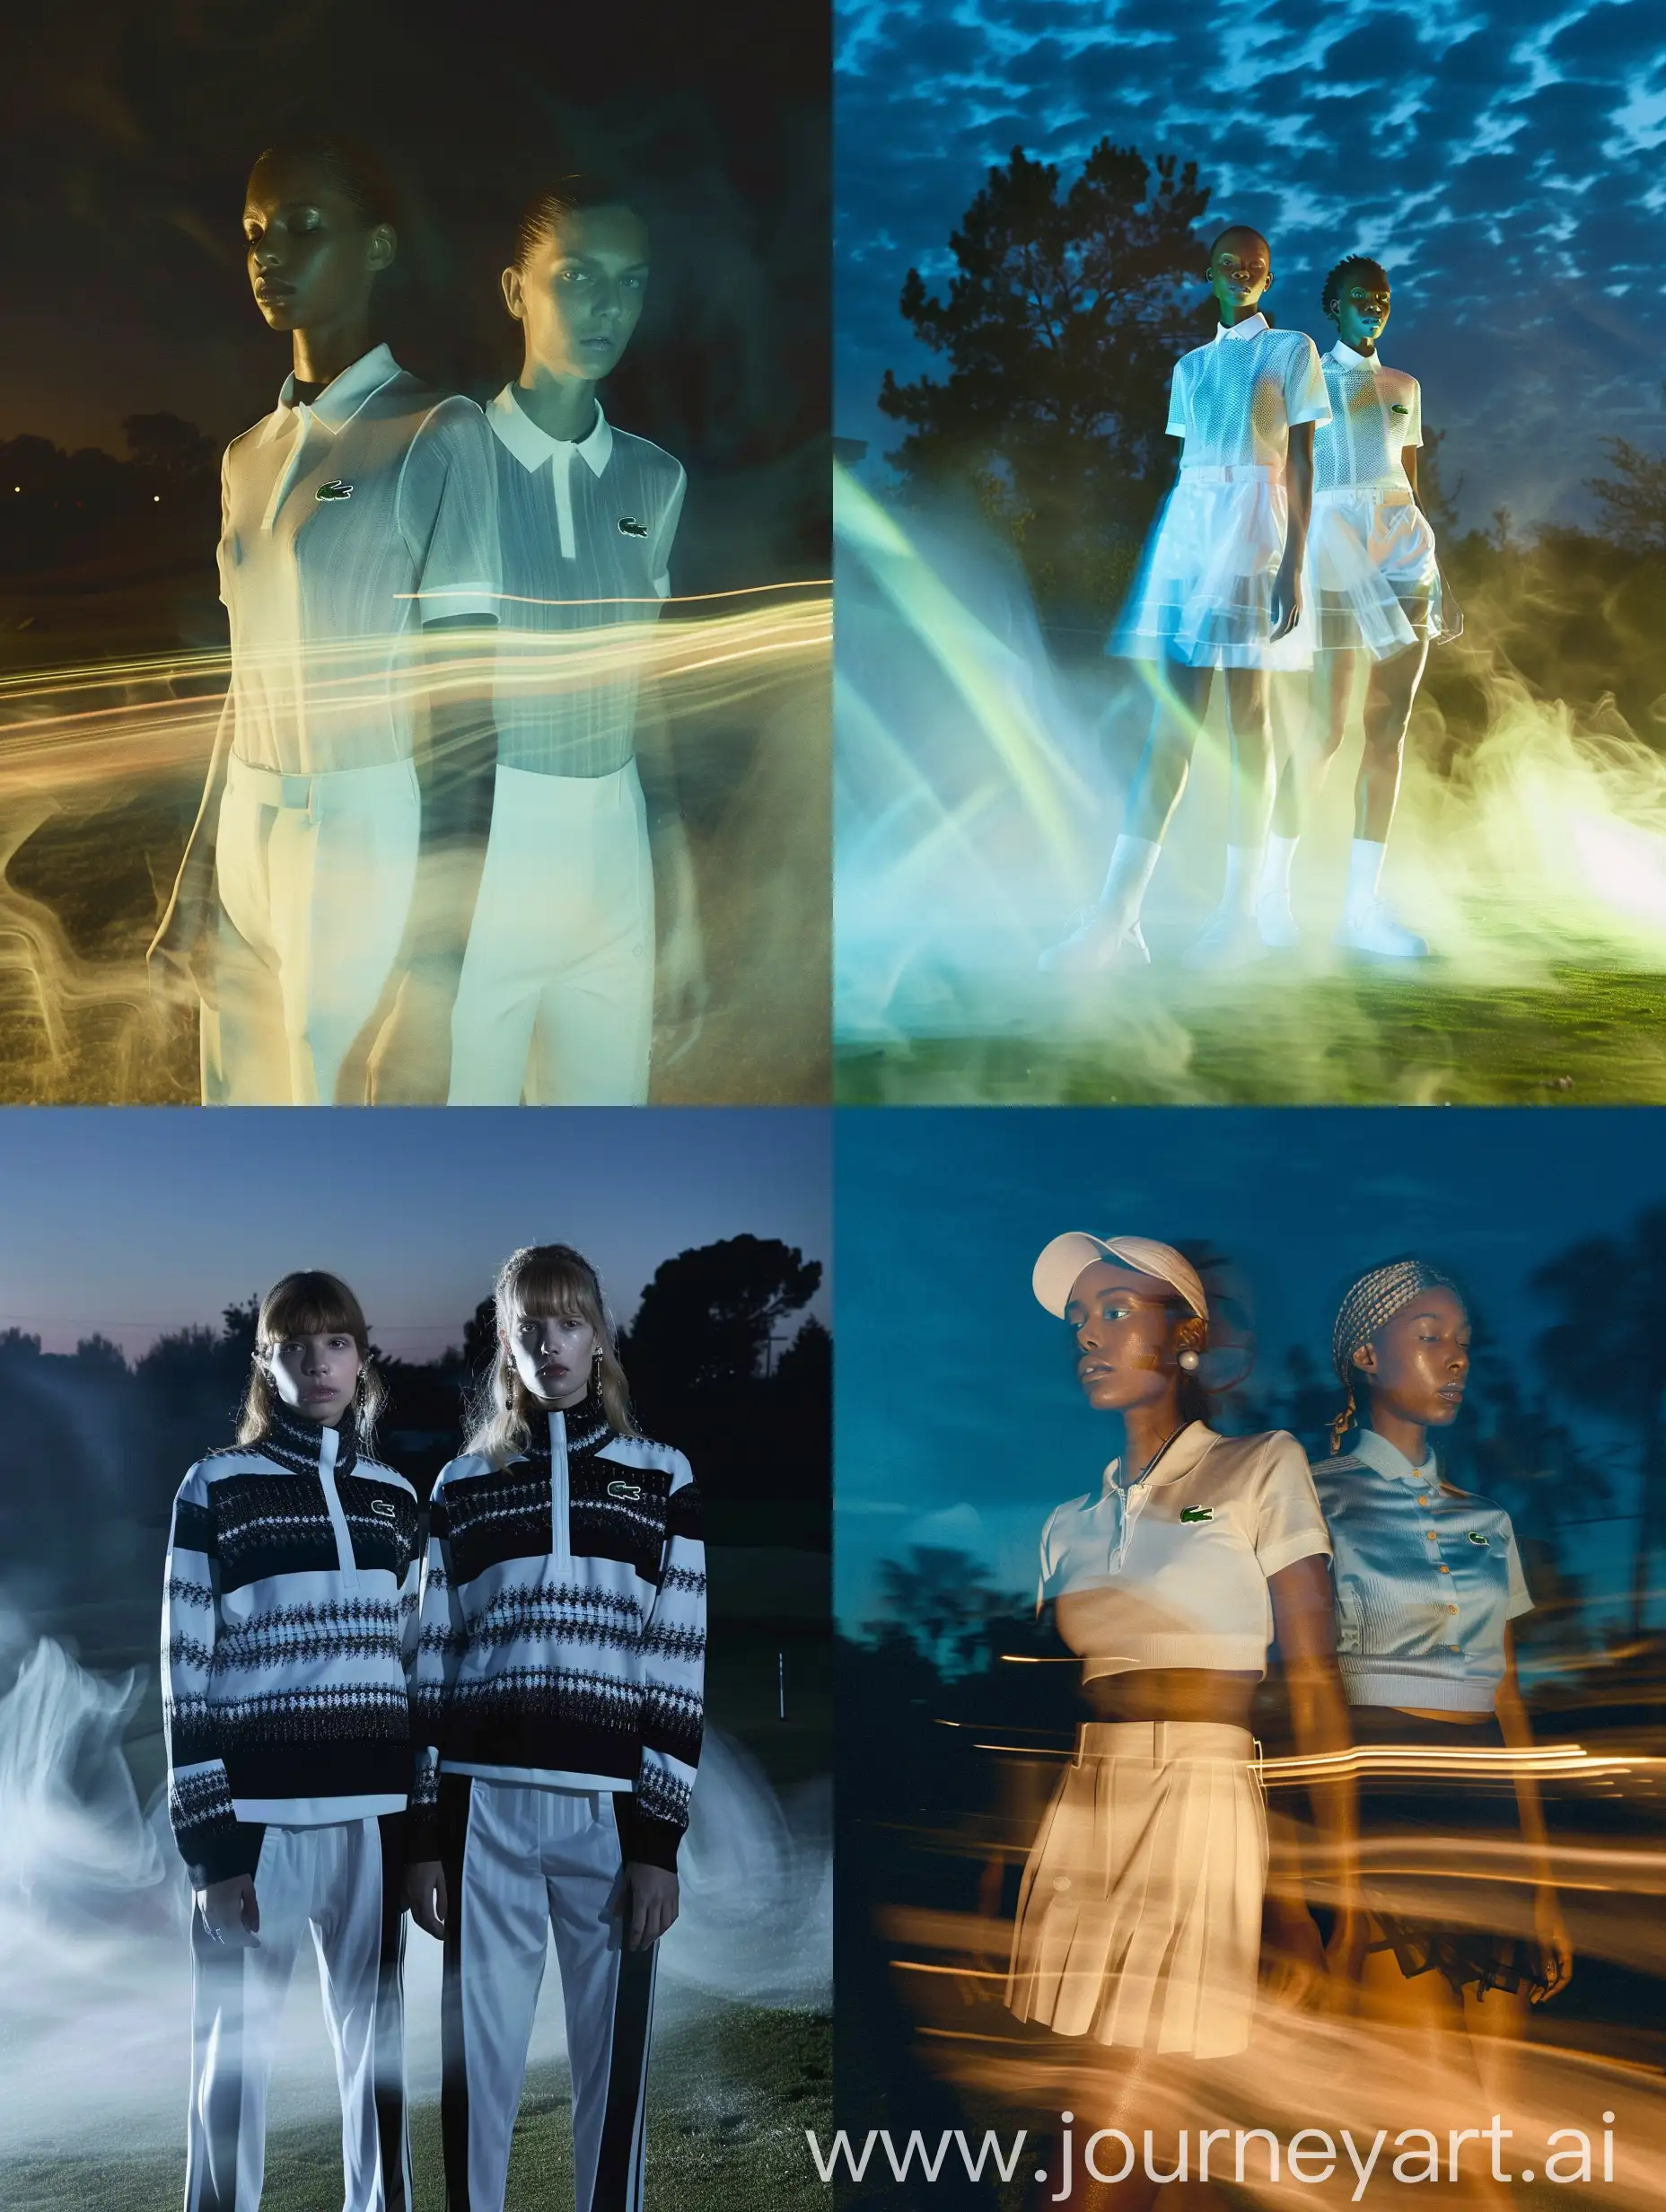 Lacoste-Modern-Golf-Style-Fashion-Editorial-with-Confident-Duo-Models